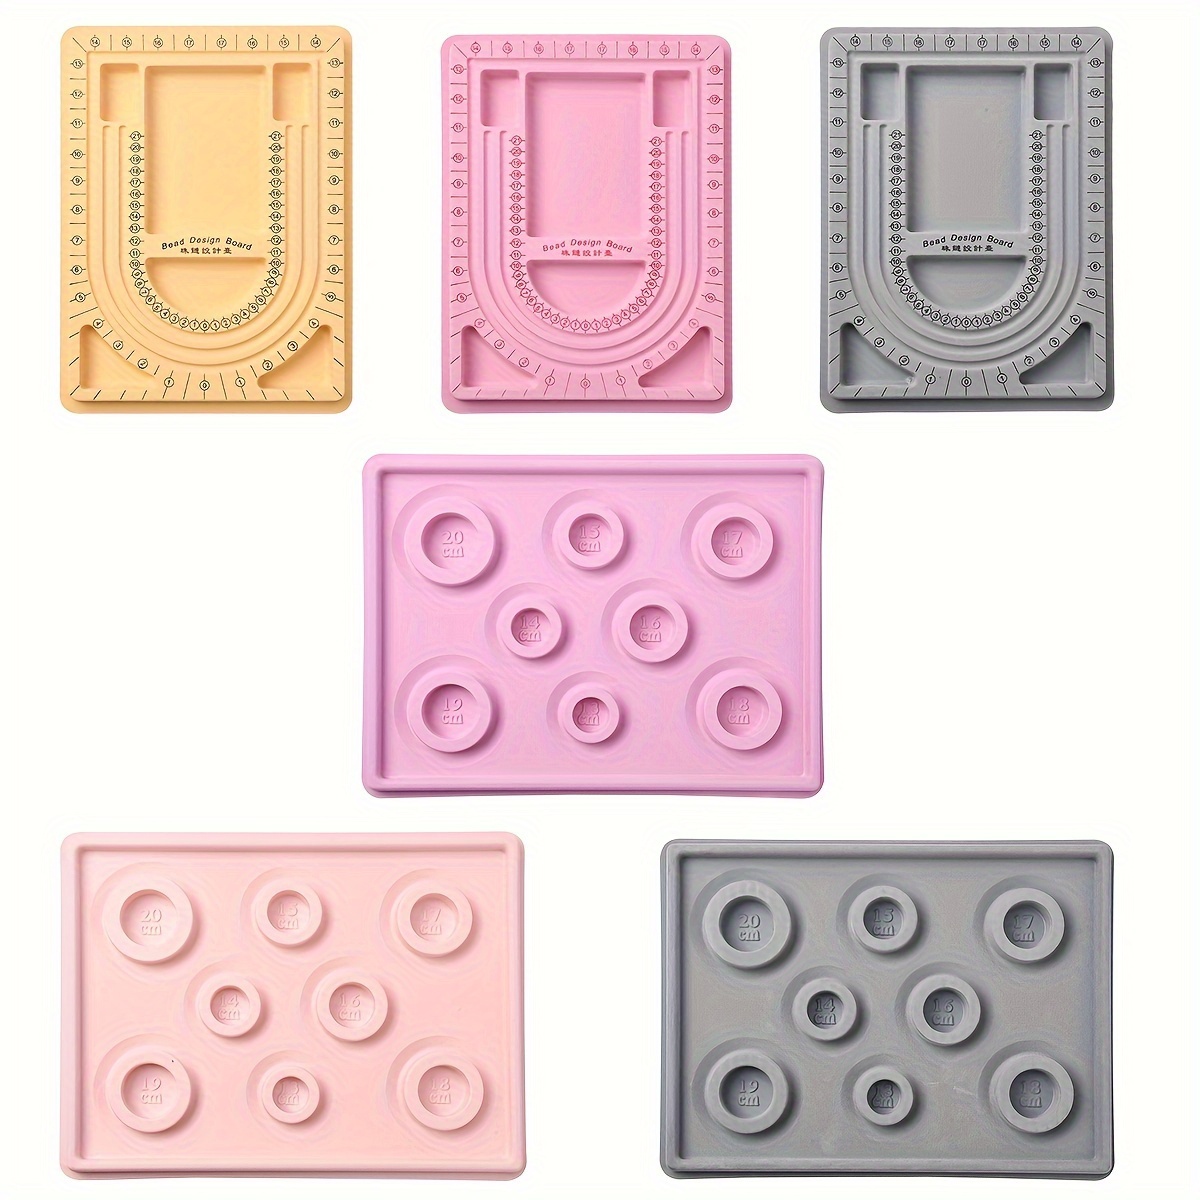 

1pc Plastic Material Jewelry Design Plate Suitable For Bracelet Necklace Diy Casting Craft Making